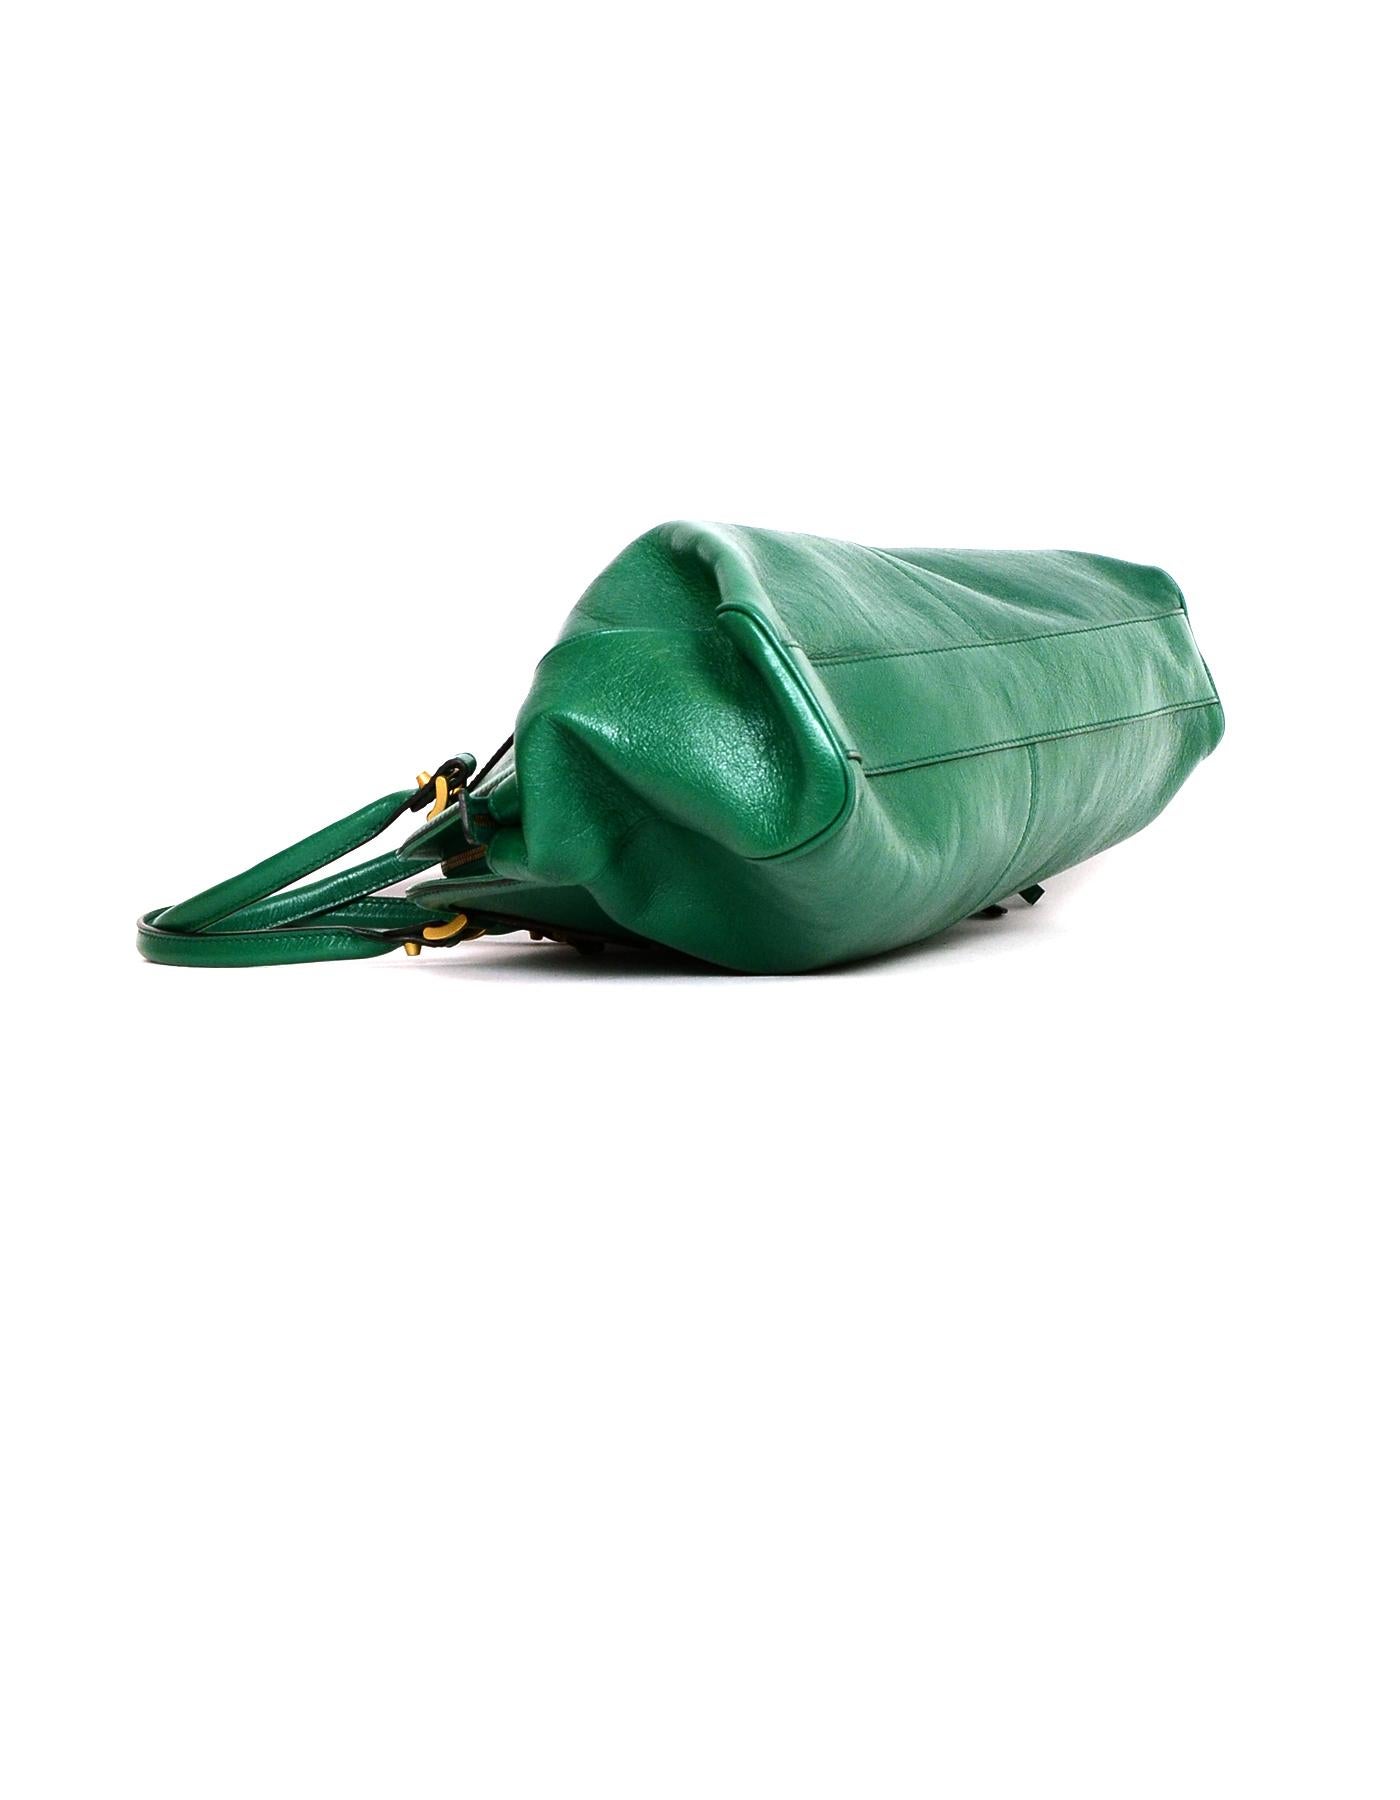 green leather tote handbags